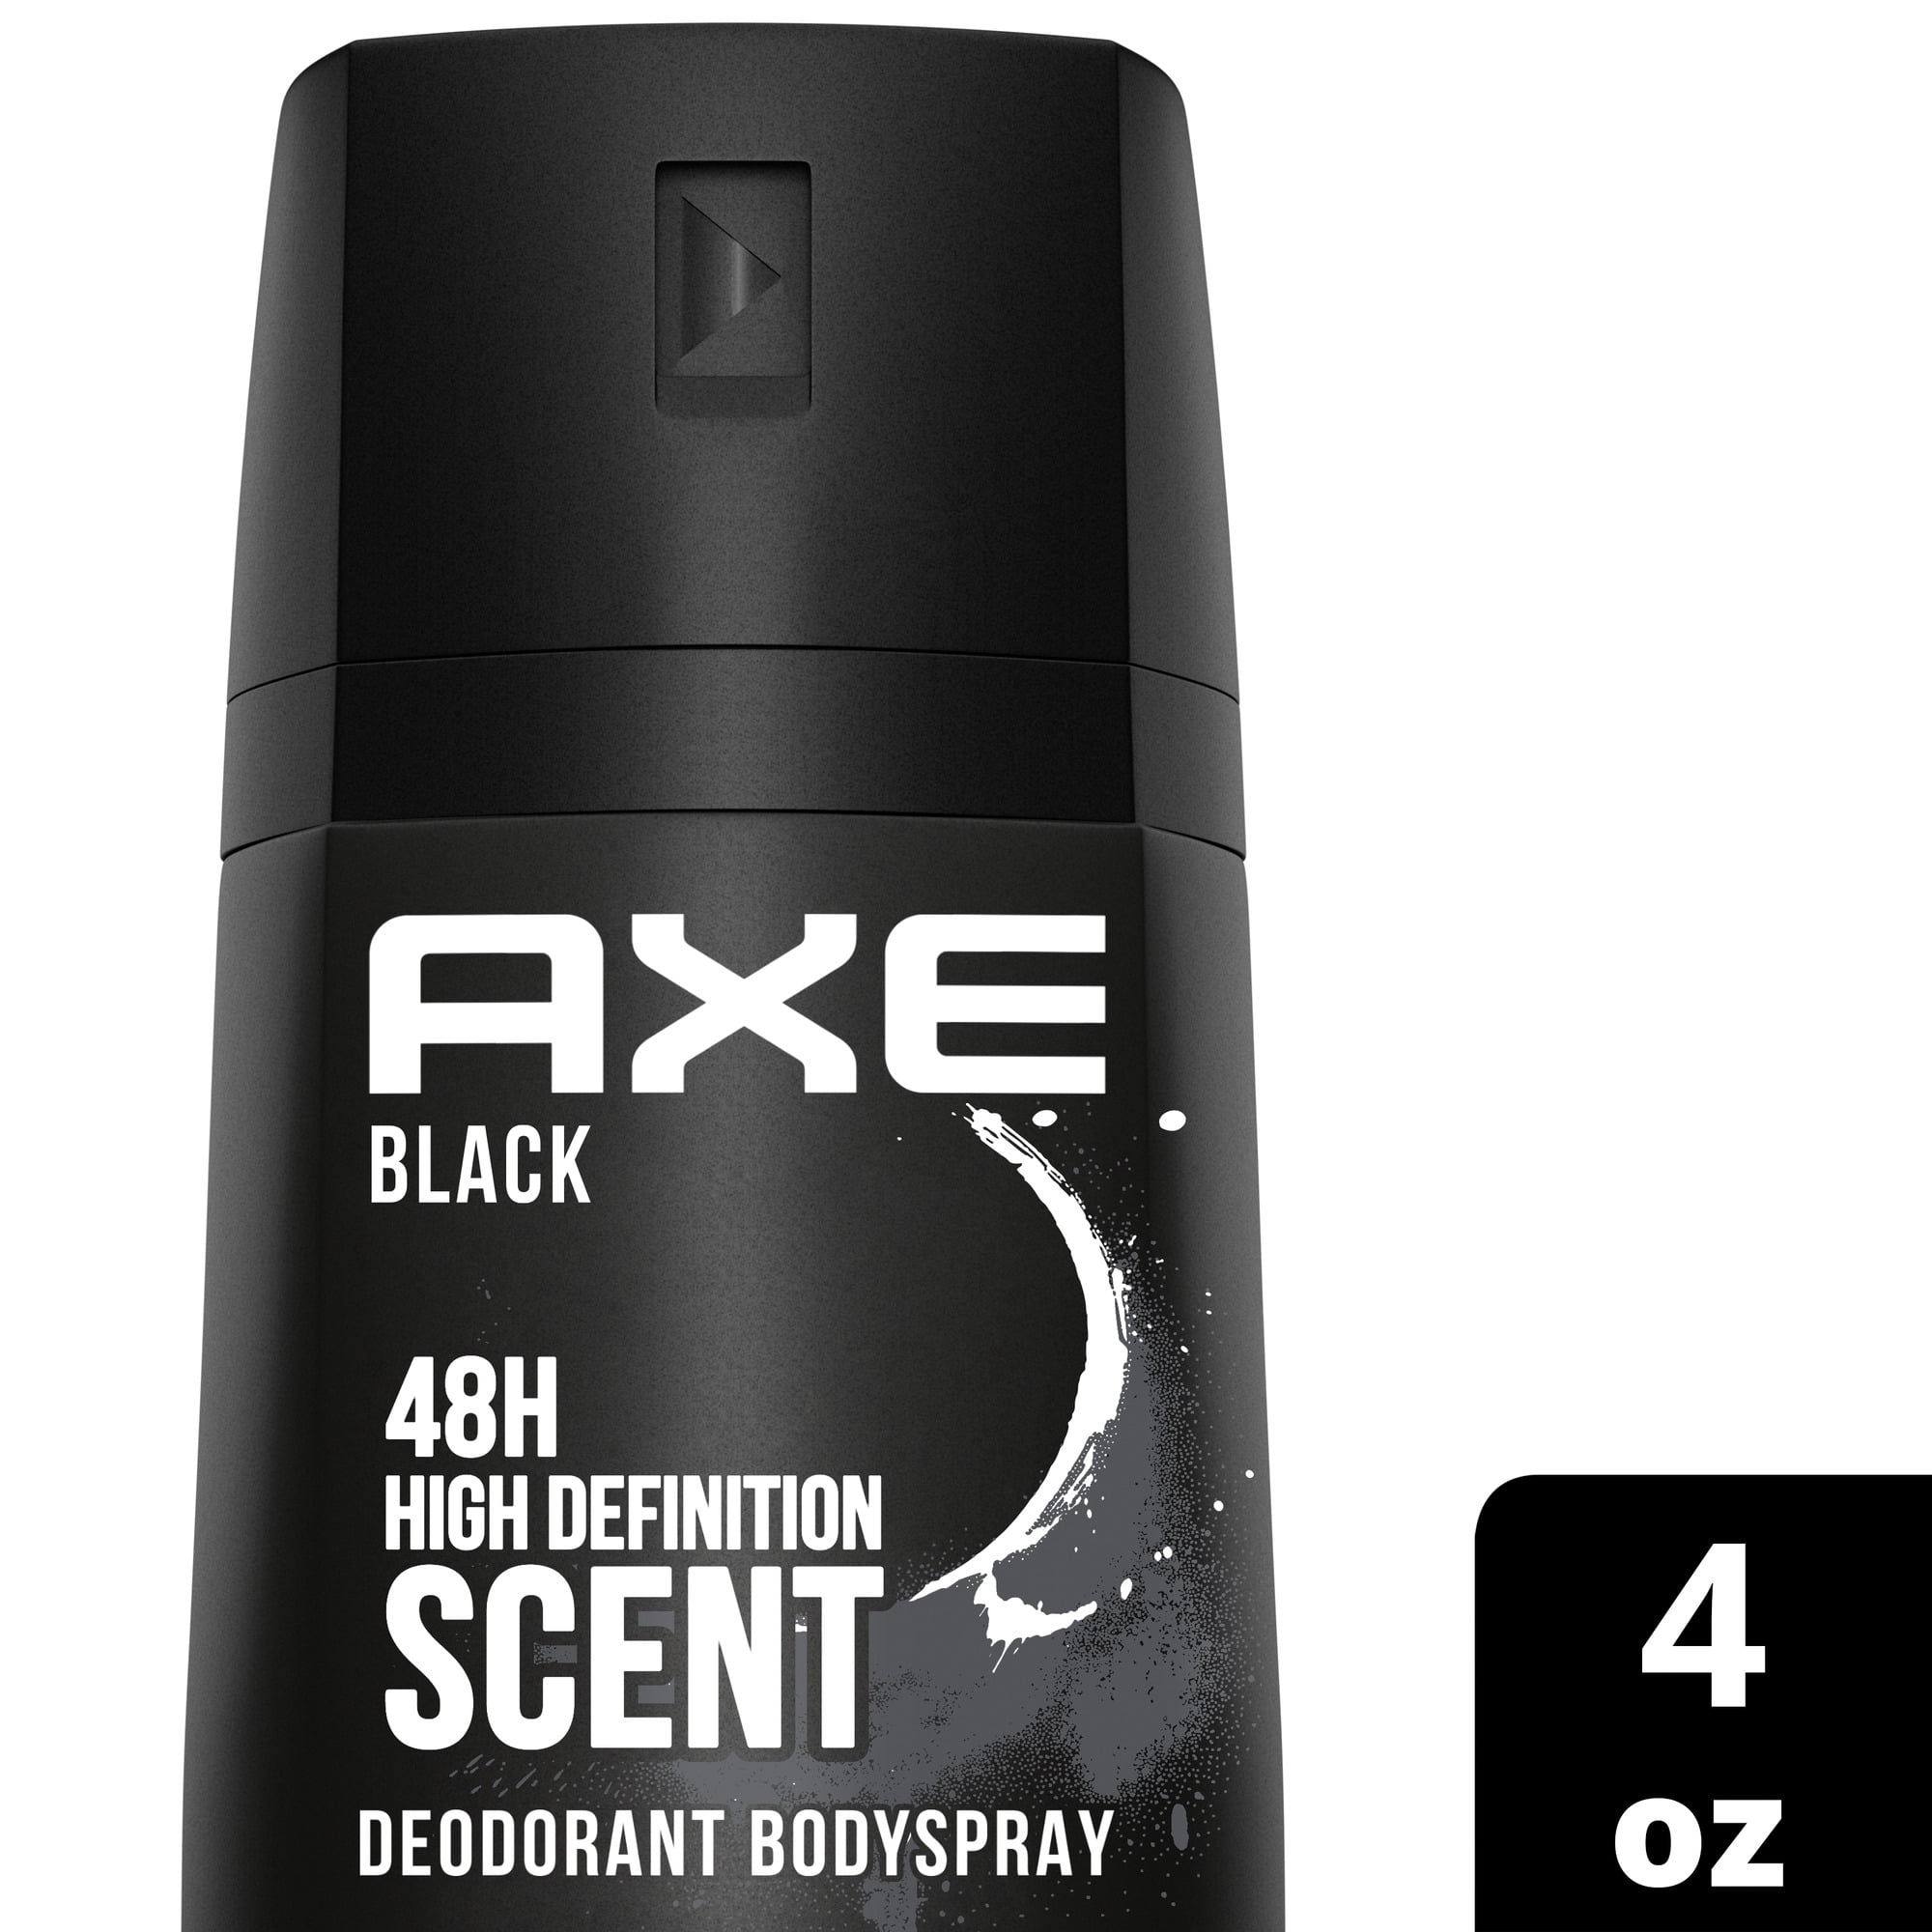 AXE Dual Action Body Deodorant for Men, Black Pear & Cedarwood Formulated without 4.0 oz - Walmart.com